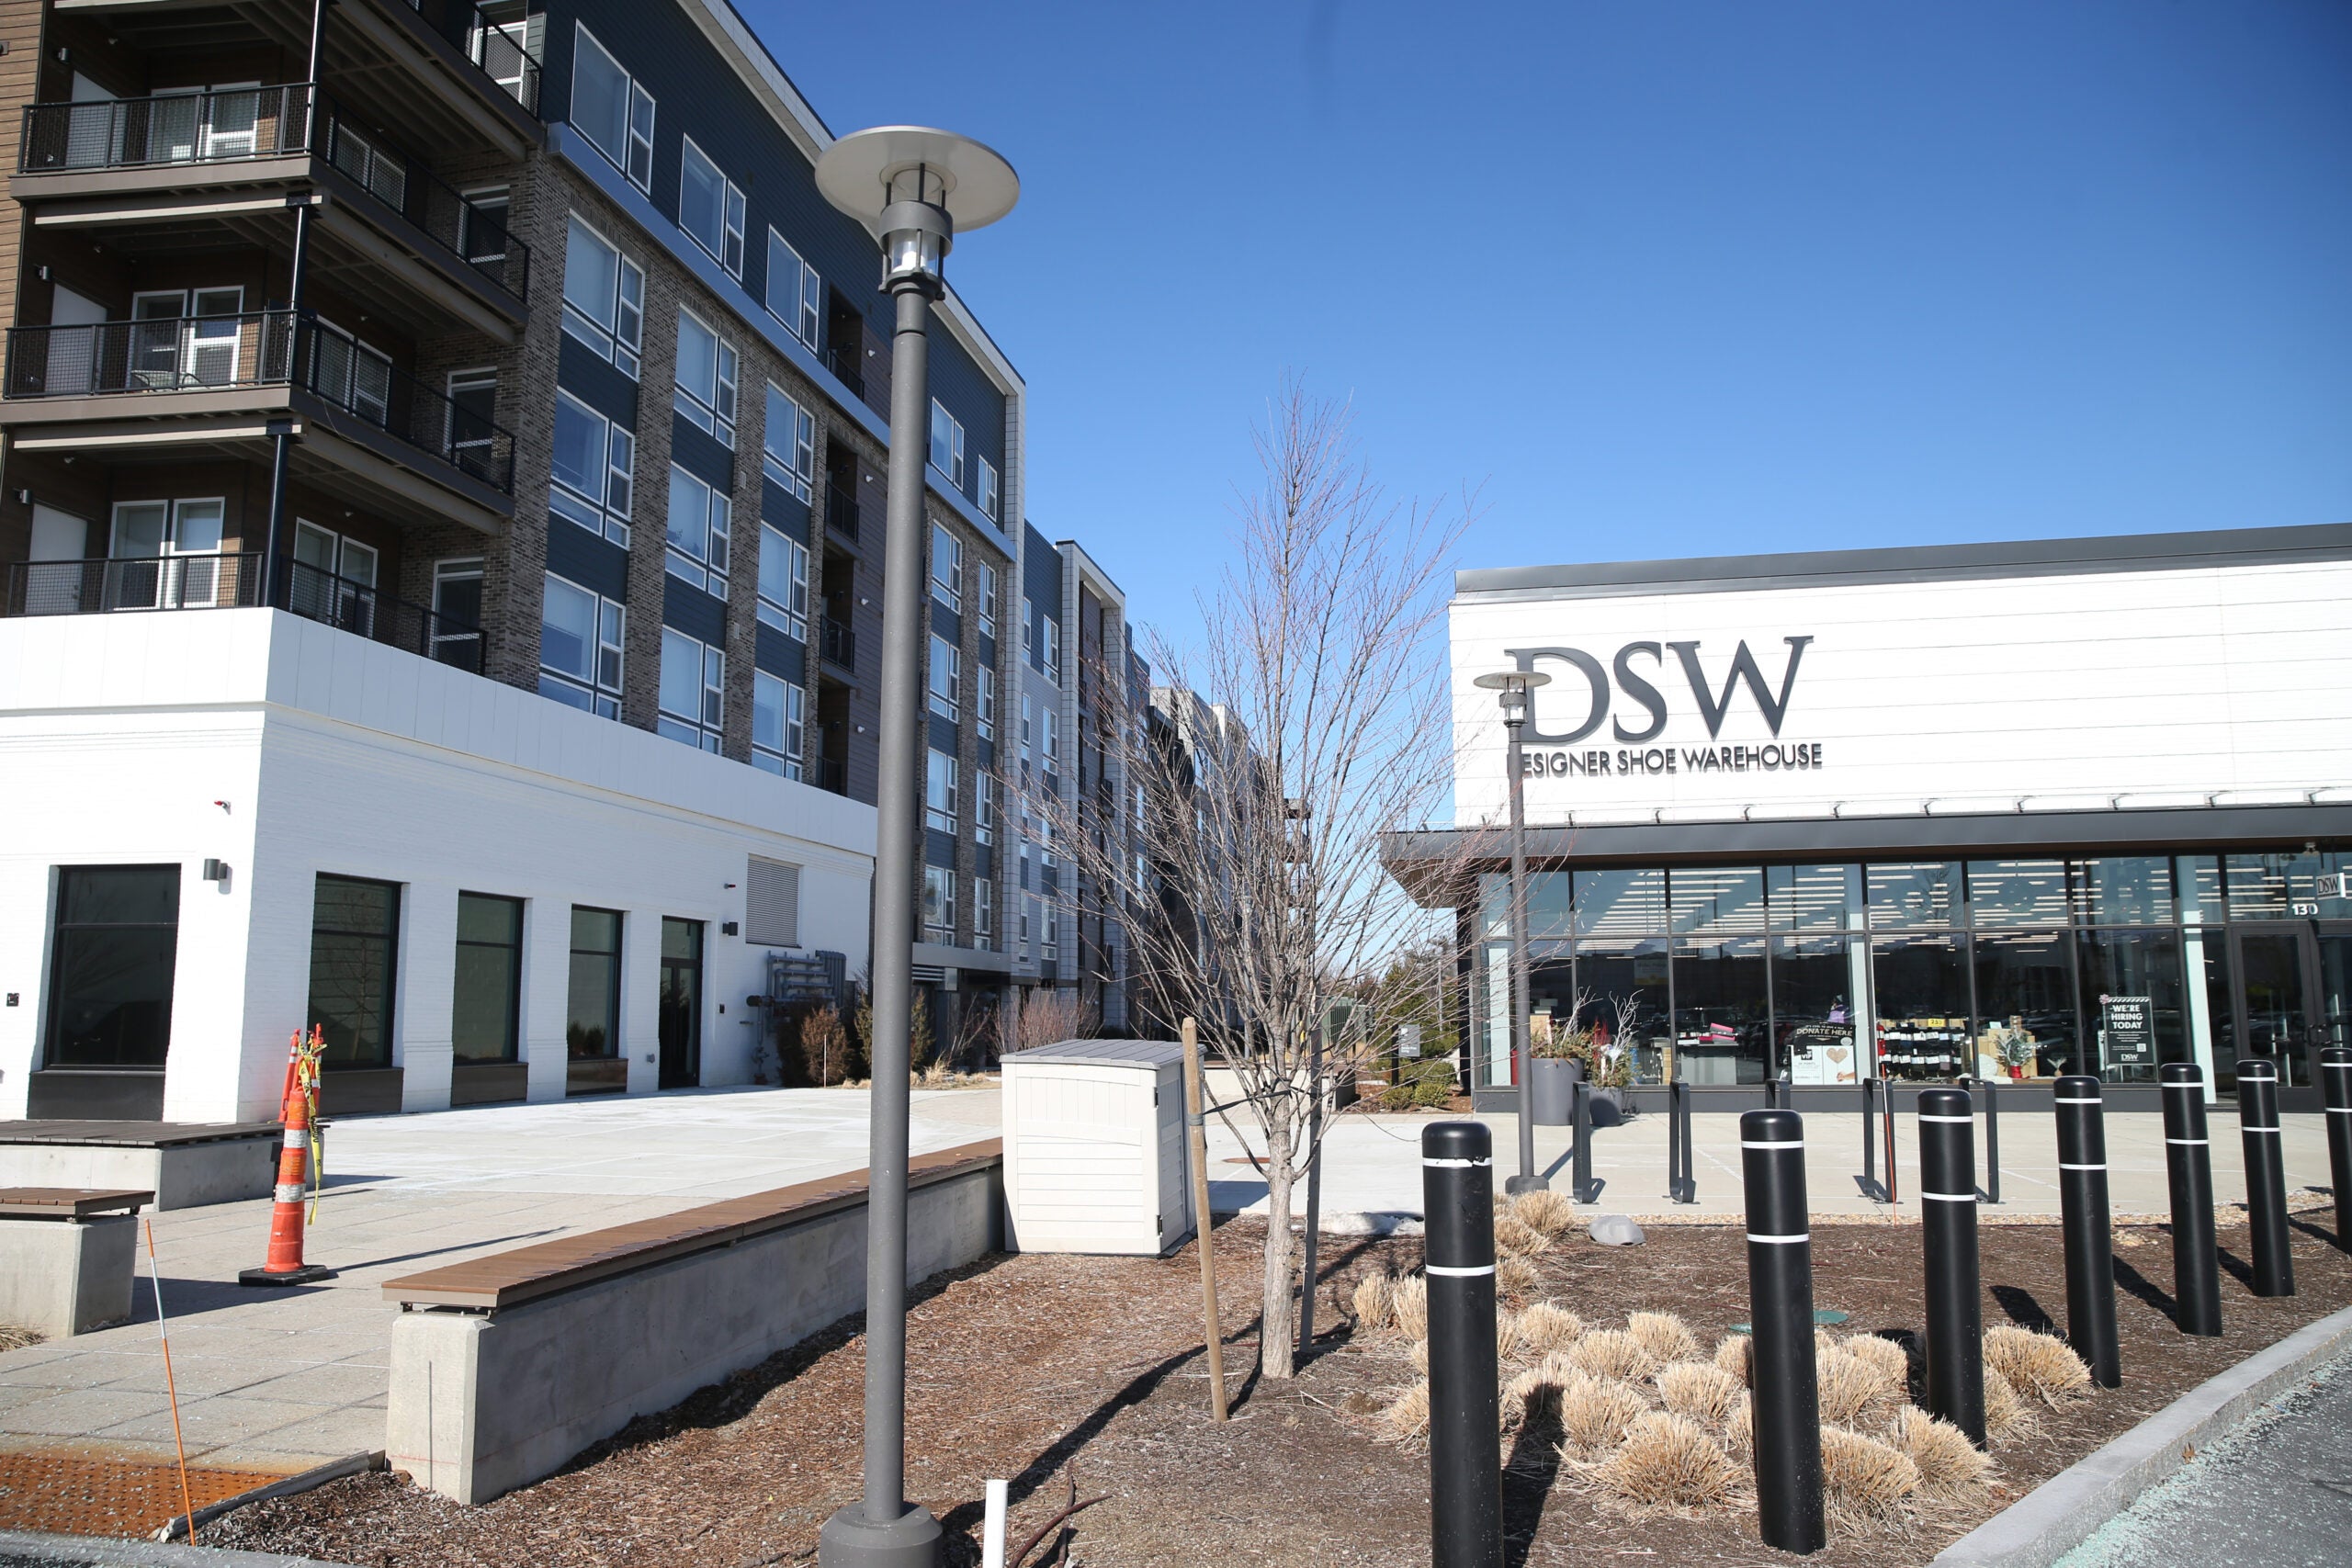 a view of a four-story apartment building next to a DSW shoe store.